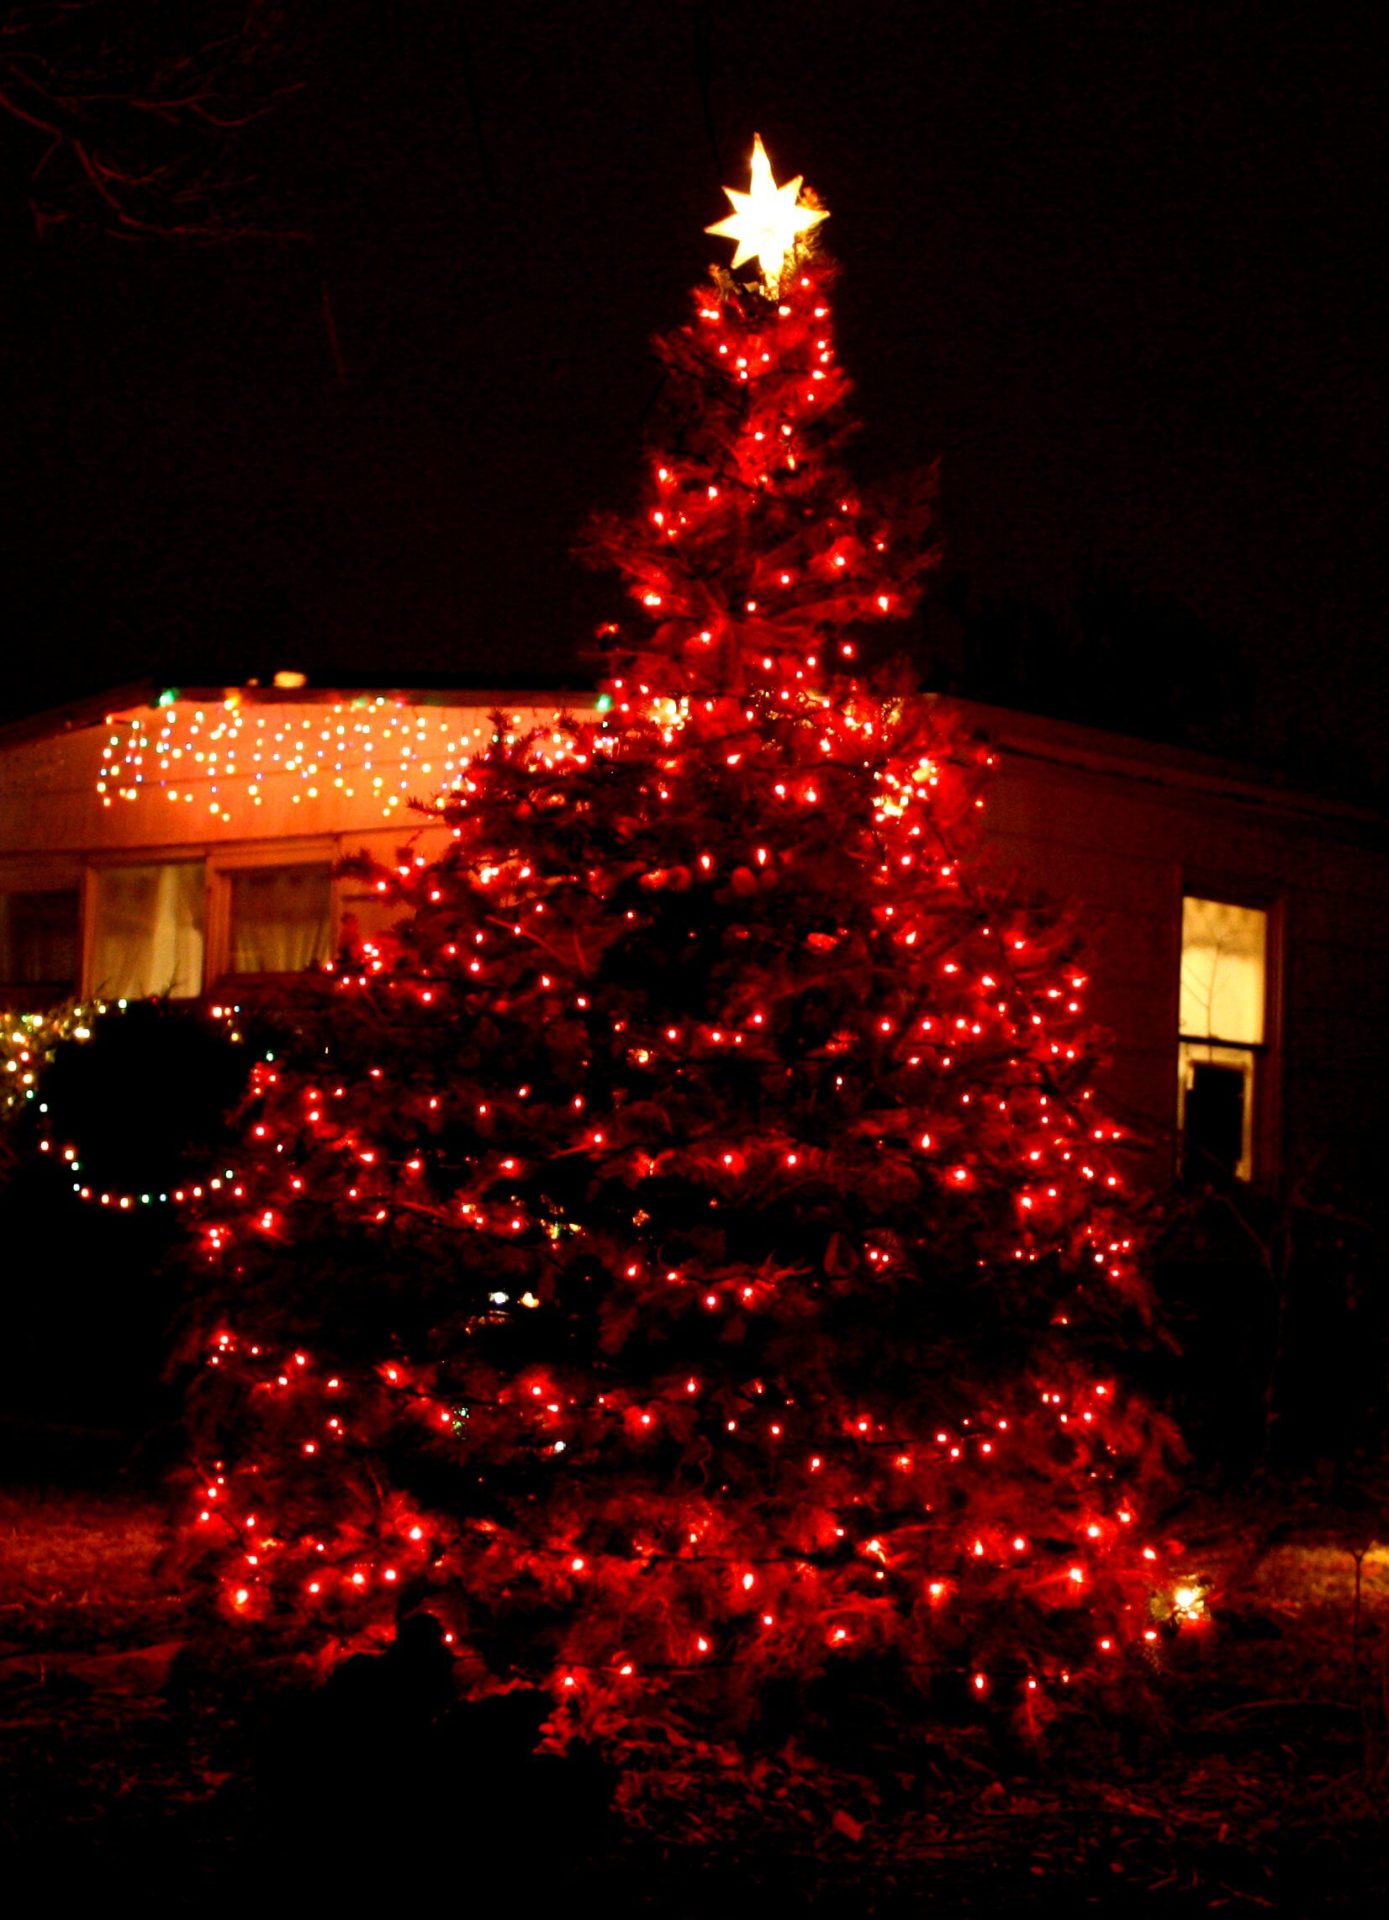 outdoor christmas tree, commercial christmas tree, large outdoor christmas tree, led outdoor christmas tree, large christmas tree, outdoor commercial christmas trees, 20 foot christmas tree, 16 foot christmas tree, large outdoor christmas trees for sale, outside christmas tree, commercial artificial christmas trees sale, outdoor xmas tree, commercial christmas trees wholesale, 20 christmas tree, commercial xmas trees, diy pole christmas tree, 50 foot christmas tree, large outdoor artificial xmas trees, large outdoor christmas tree topper, 12 christmas tree, commercial artificial christmas trees, 100 ft christmas tree, 20 ft christmas tree, huge christmas tree for sale, outdoor artificial christmas trees 